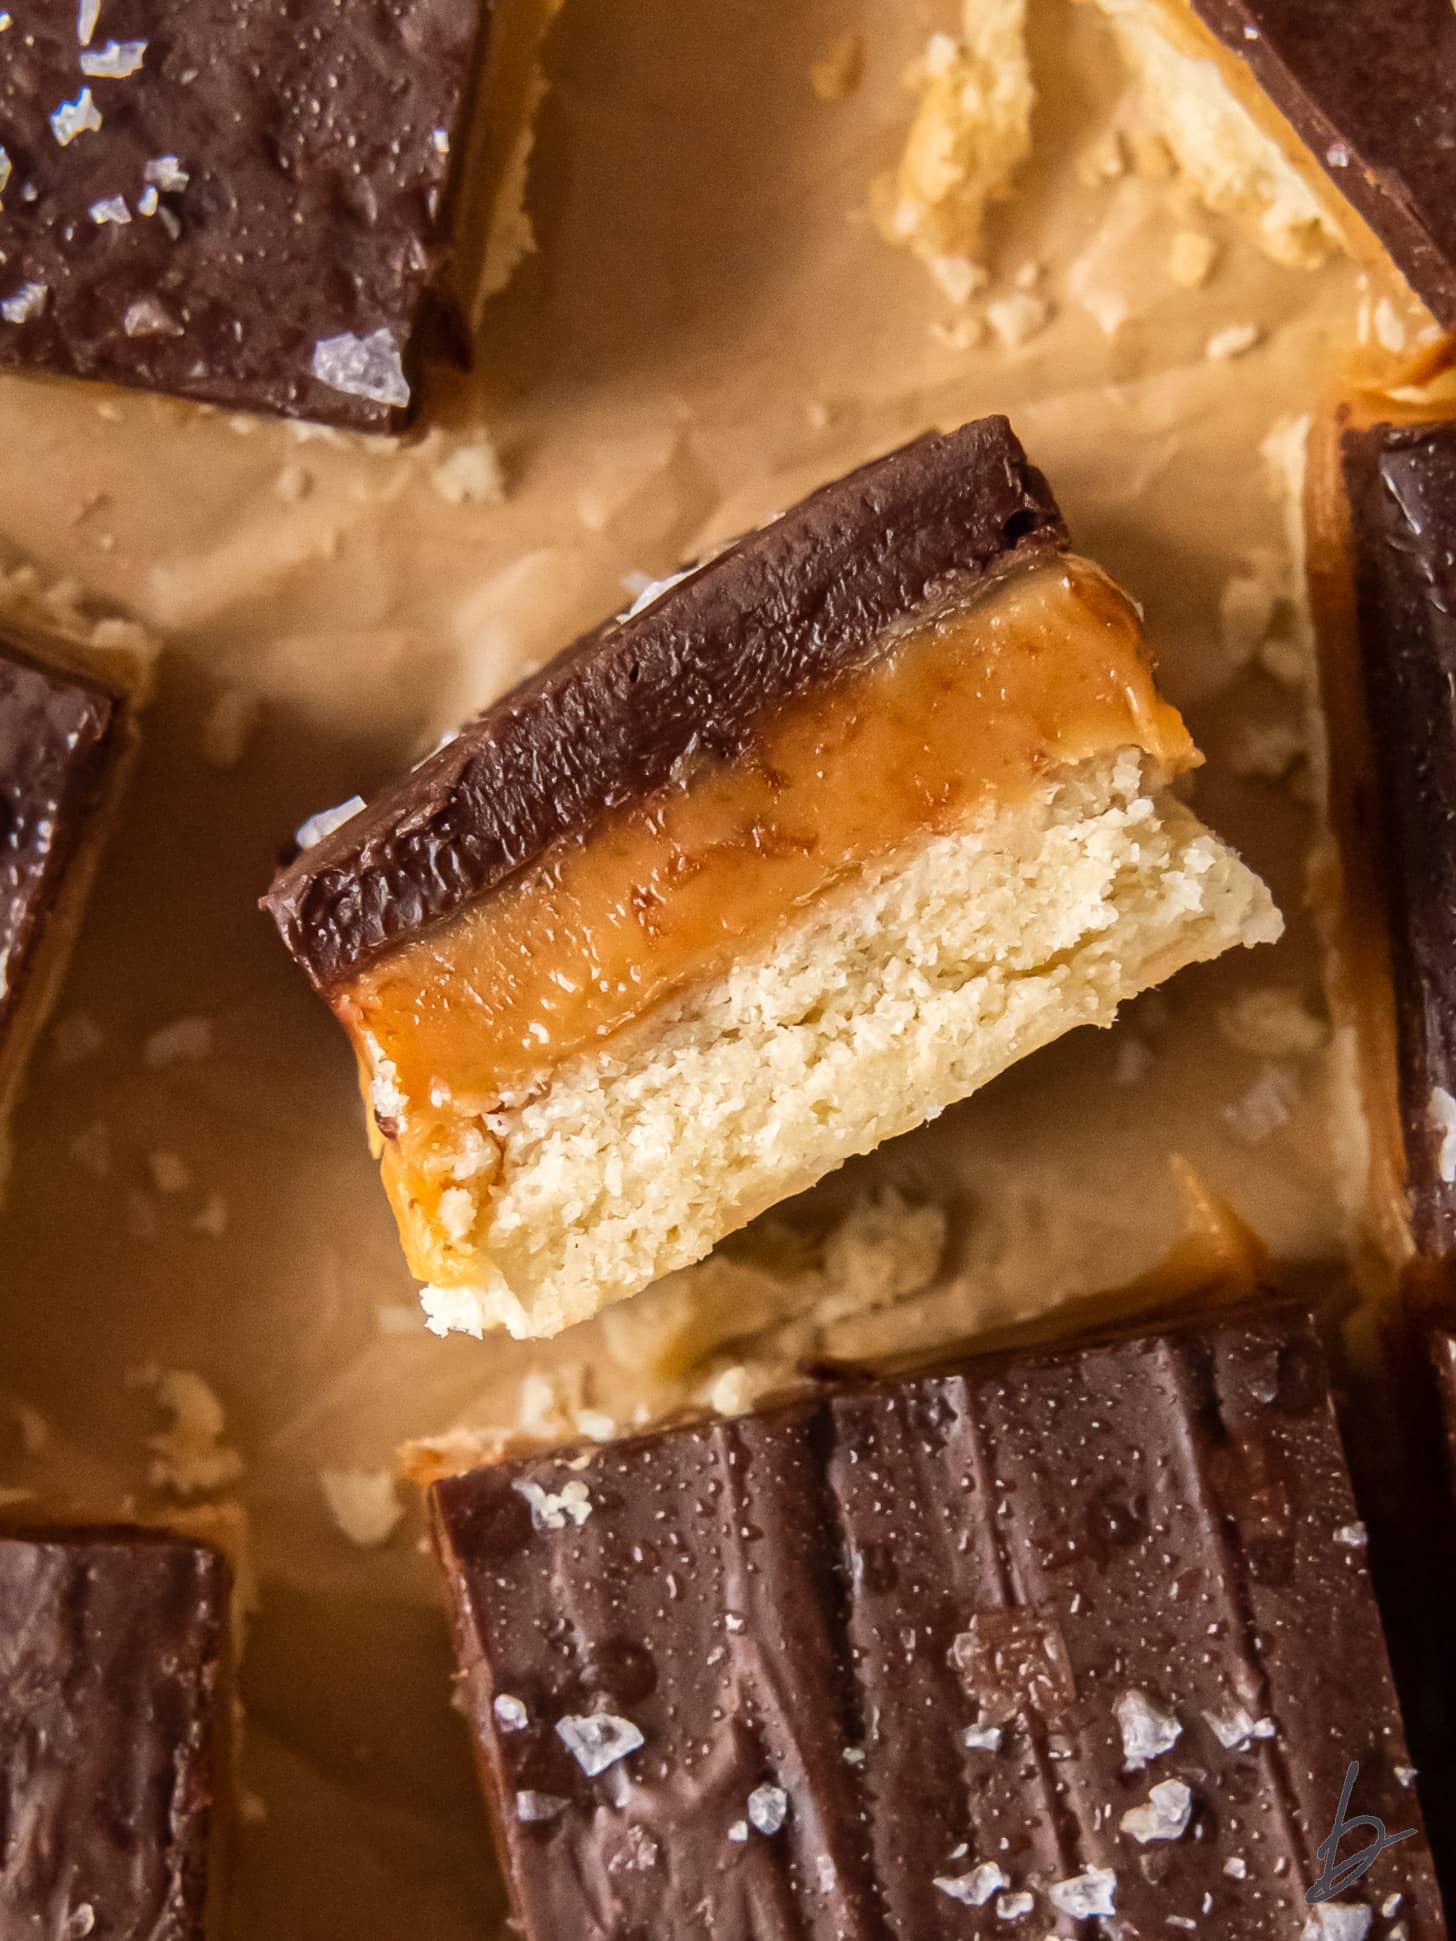 millionaires shortbread bar on its side showing inside layer with caramel.